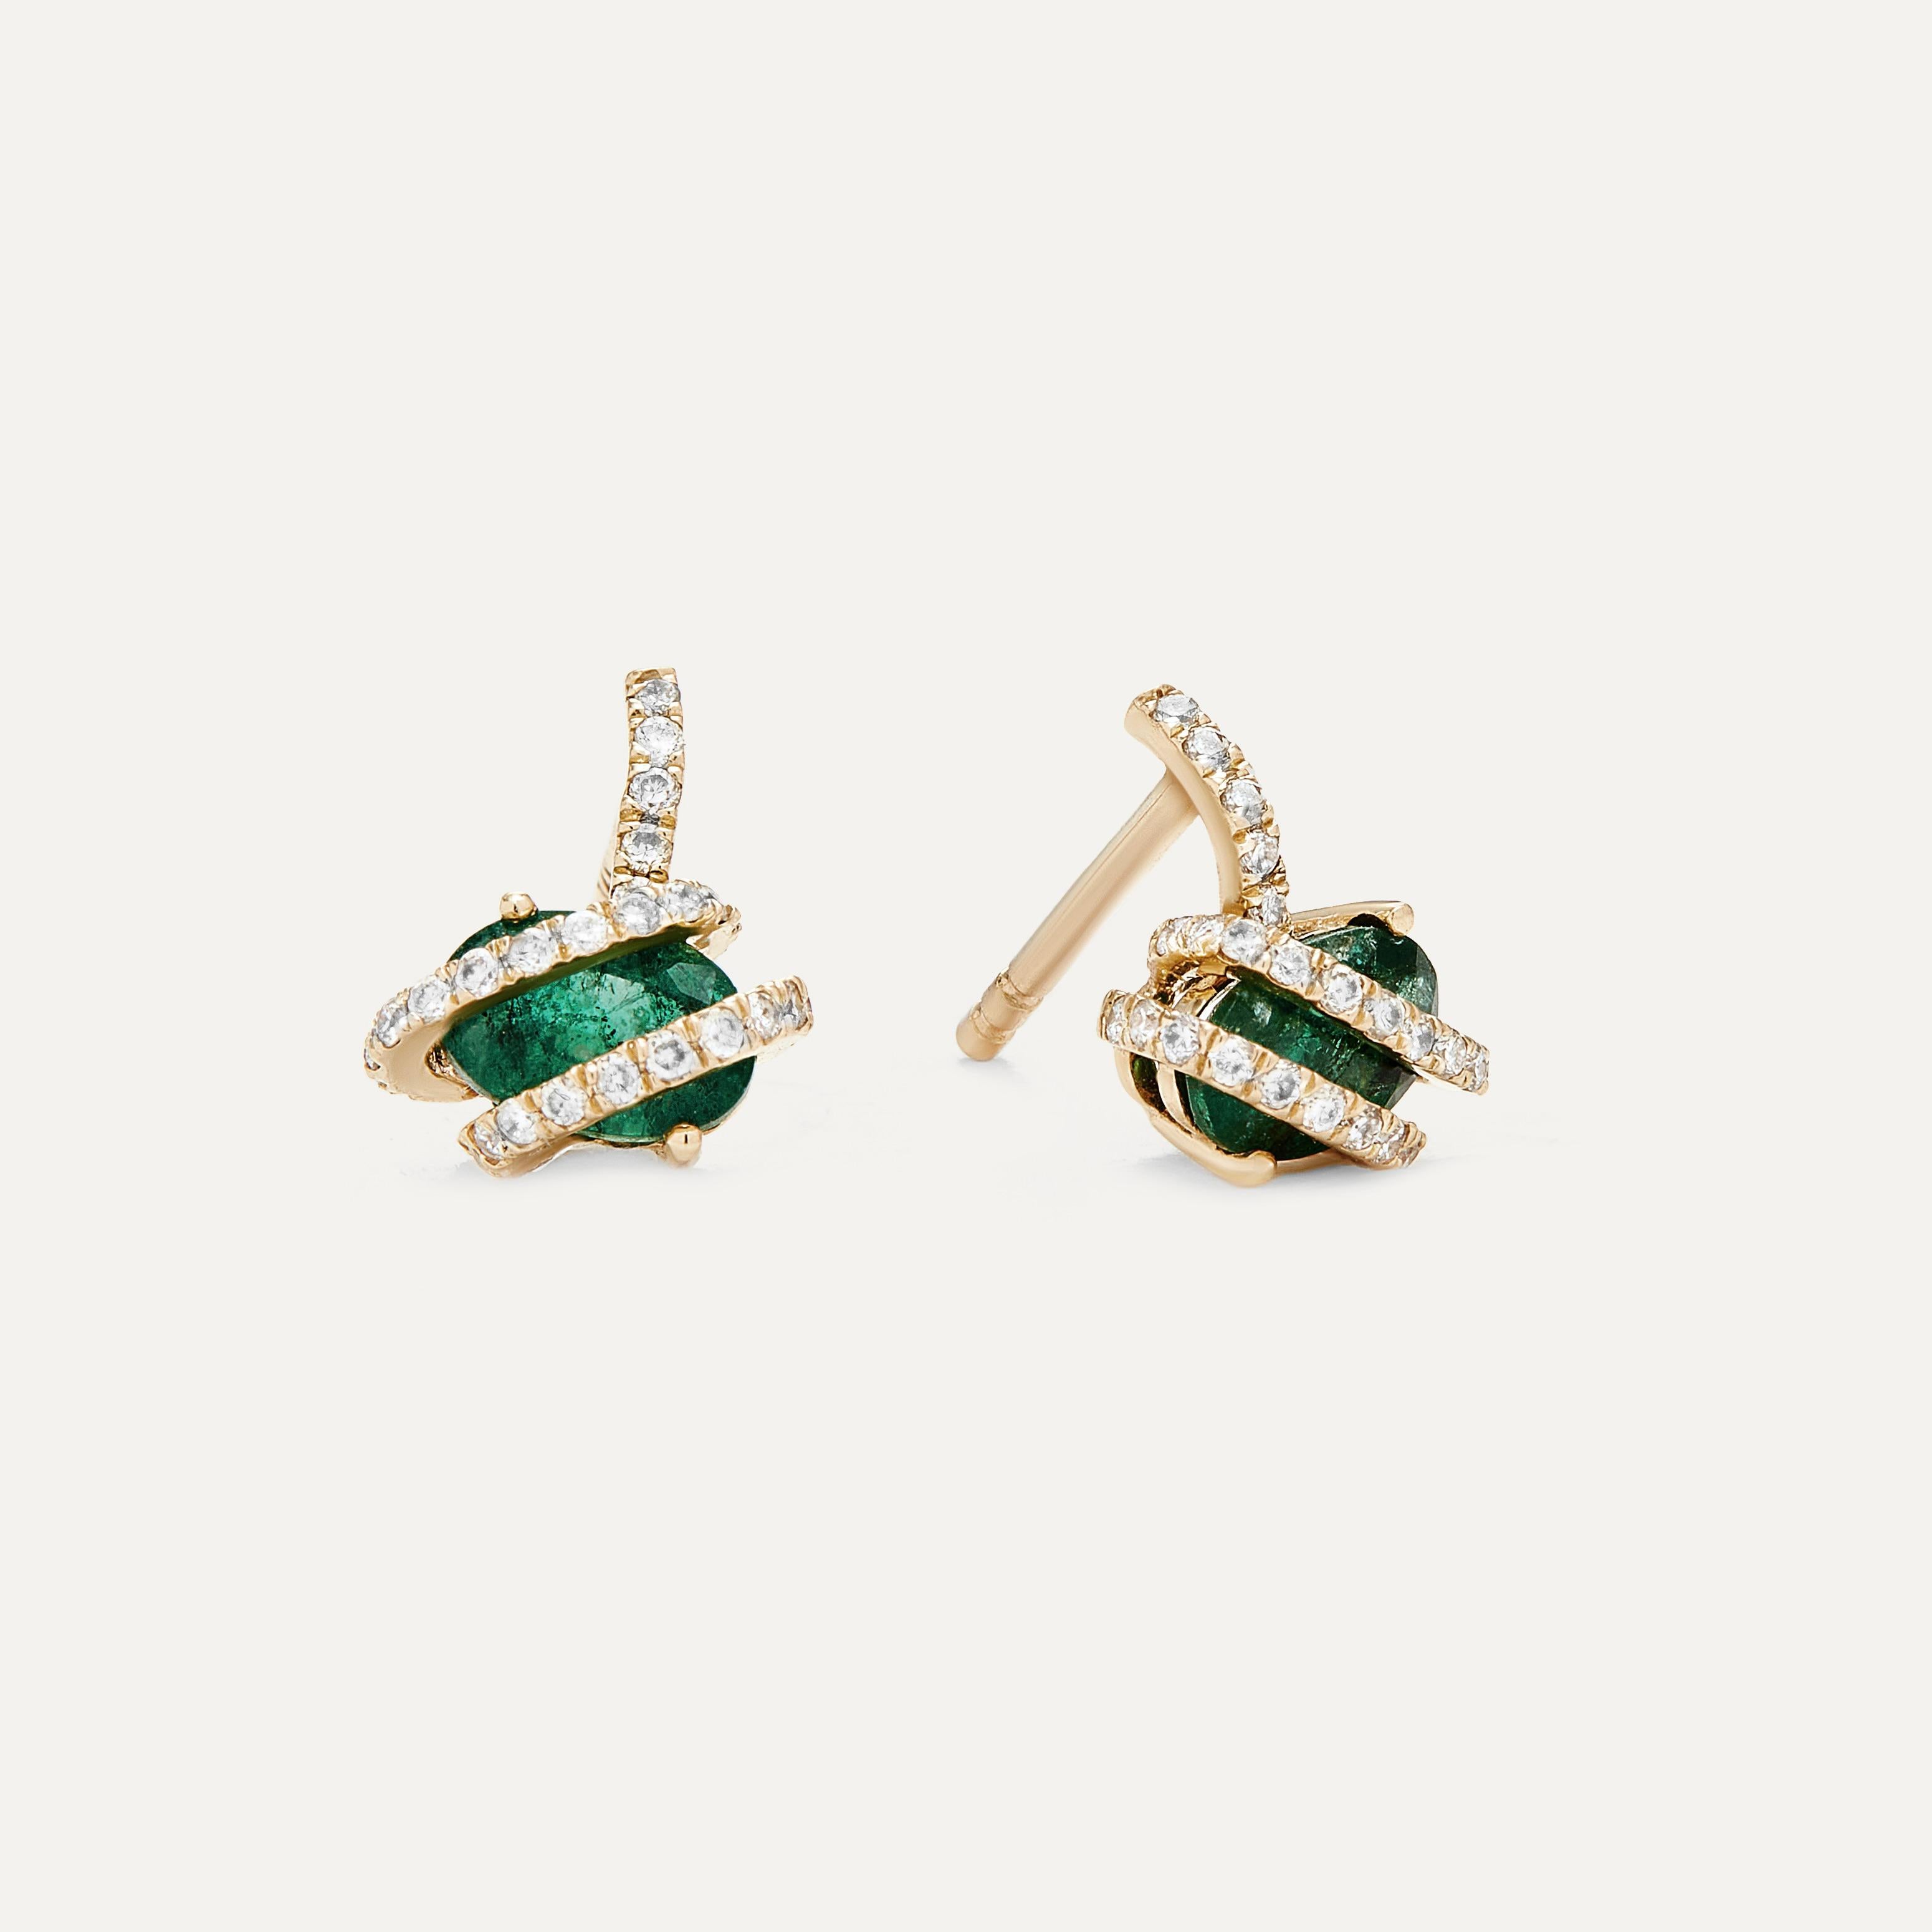 The Emerald Diamond Wrap Studs are a remarkable embodiment of elegance and sophistication. These stud earrings feature a unique and captivating design, where a vivid green oval emerald is cradled by a wrap of exquisite white diamonds. The emerald's